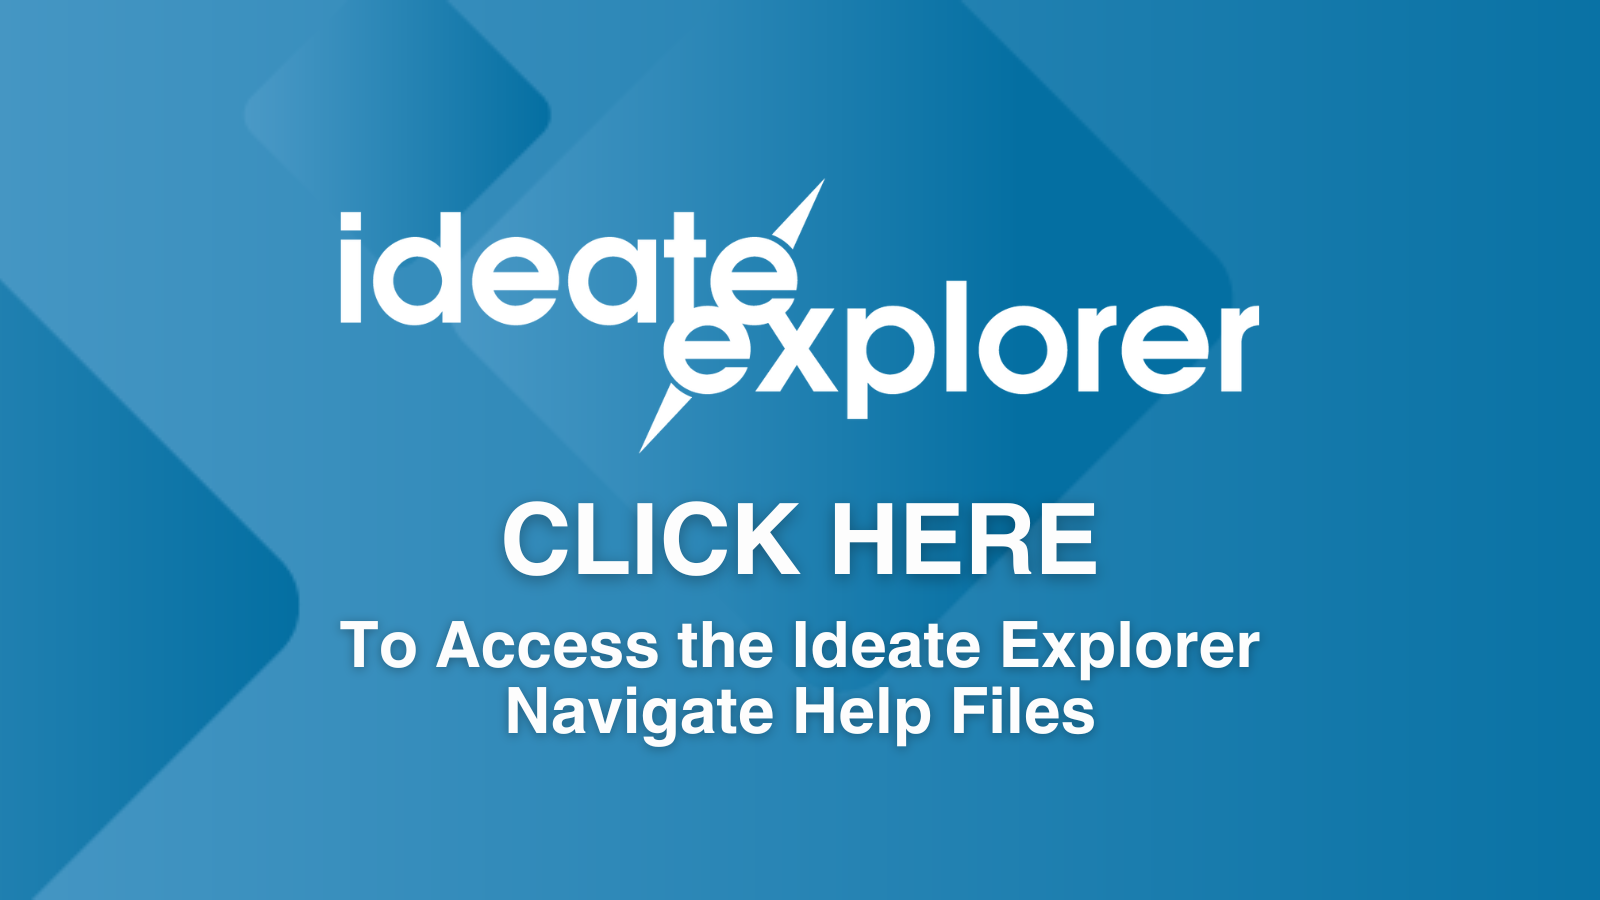 Introduction to Ideate Explorer Navigate